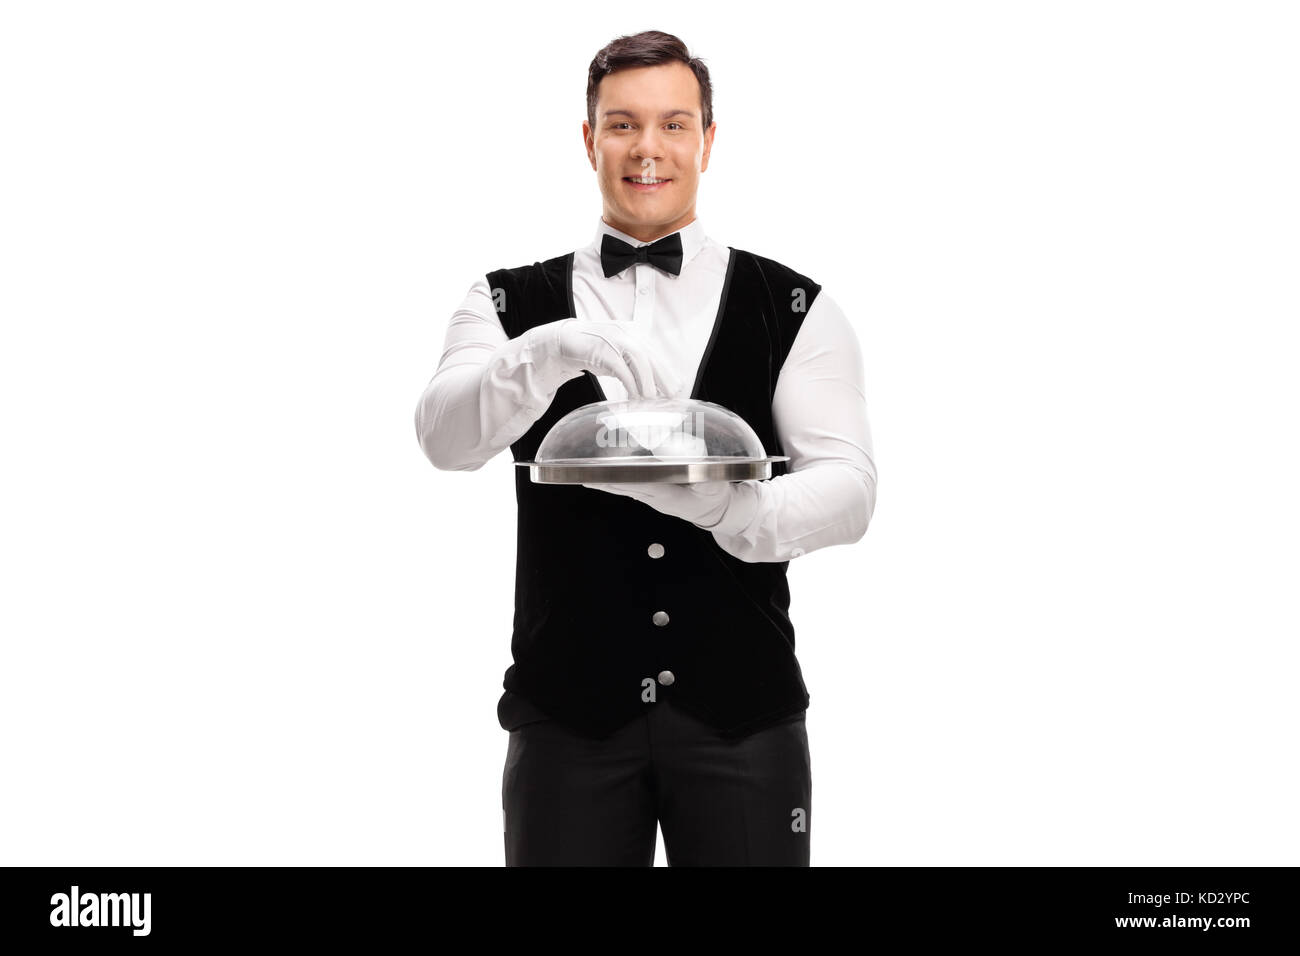 Young waiter holding an empty tray with a plastic lid isolated on white background Stock Photo